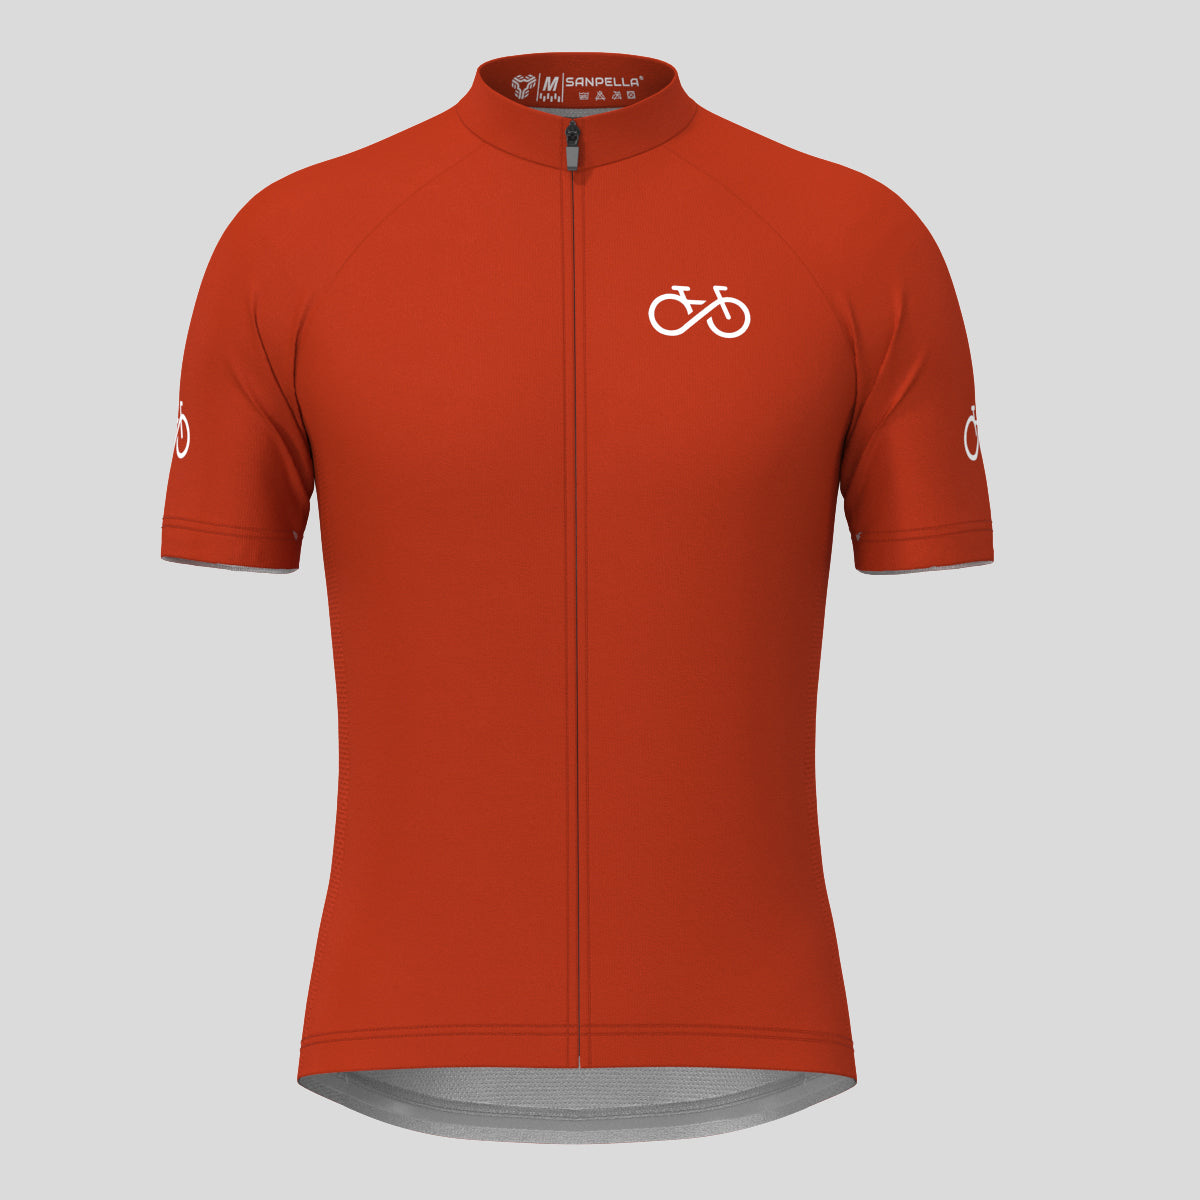 Ride Forever Men's Cycling Jersey -Brick